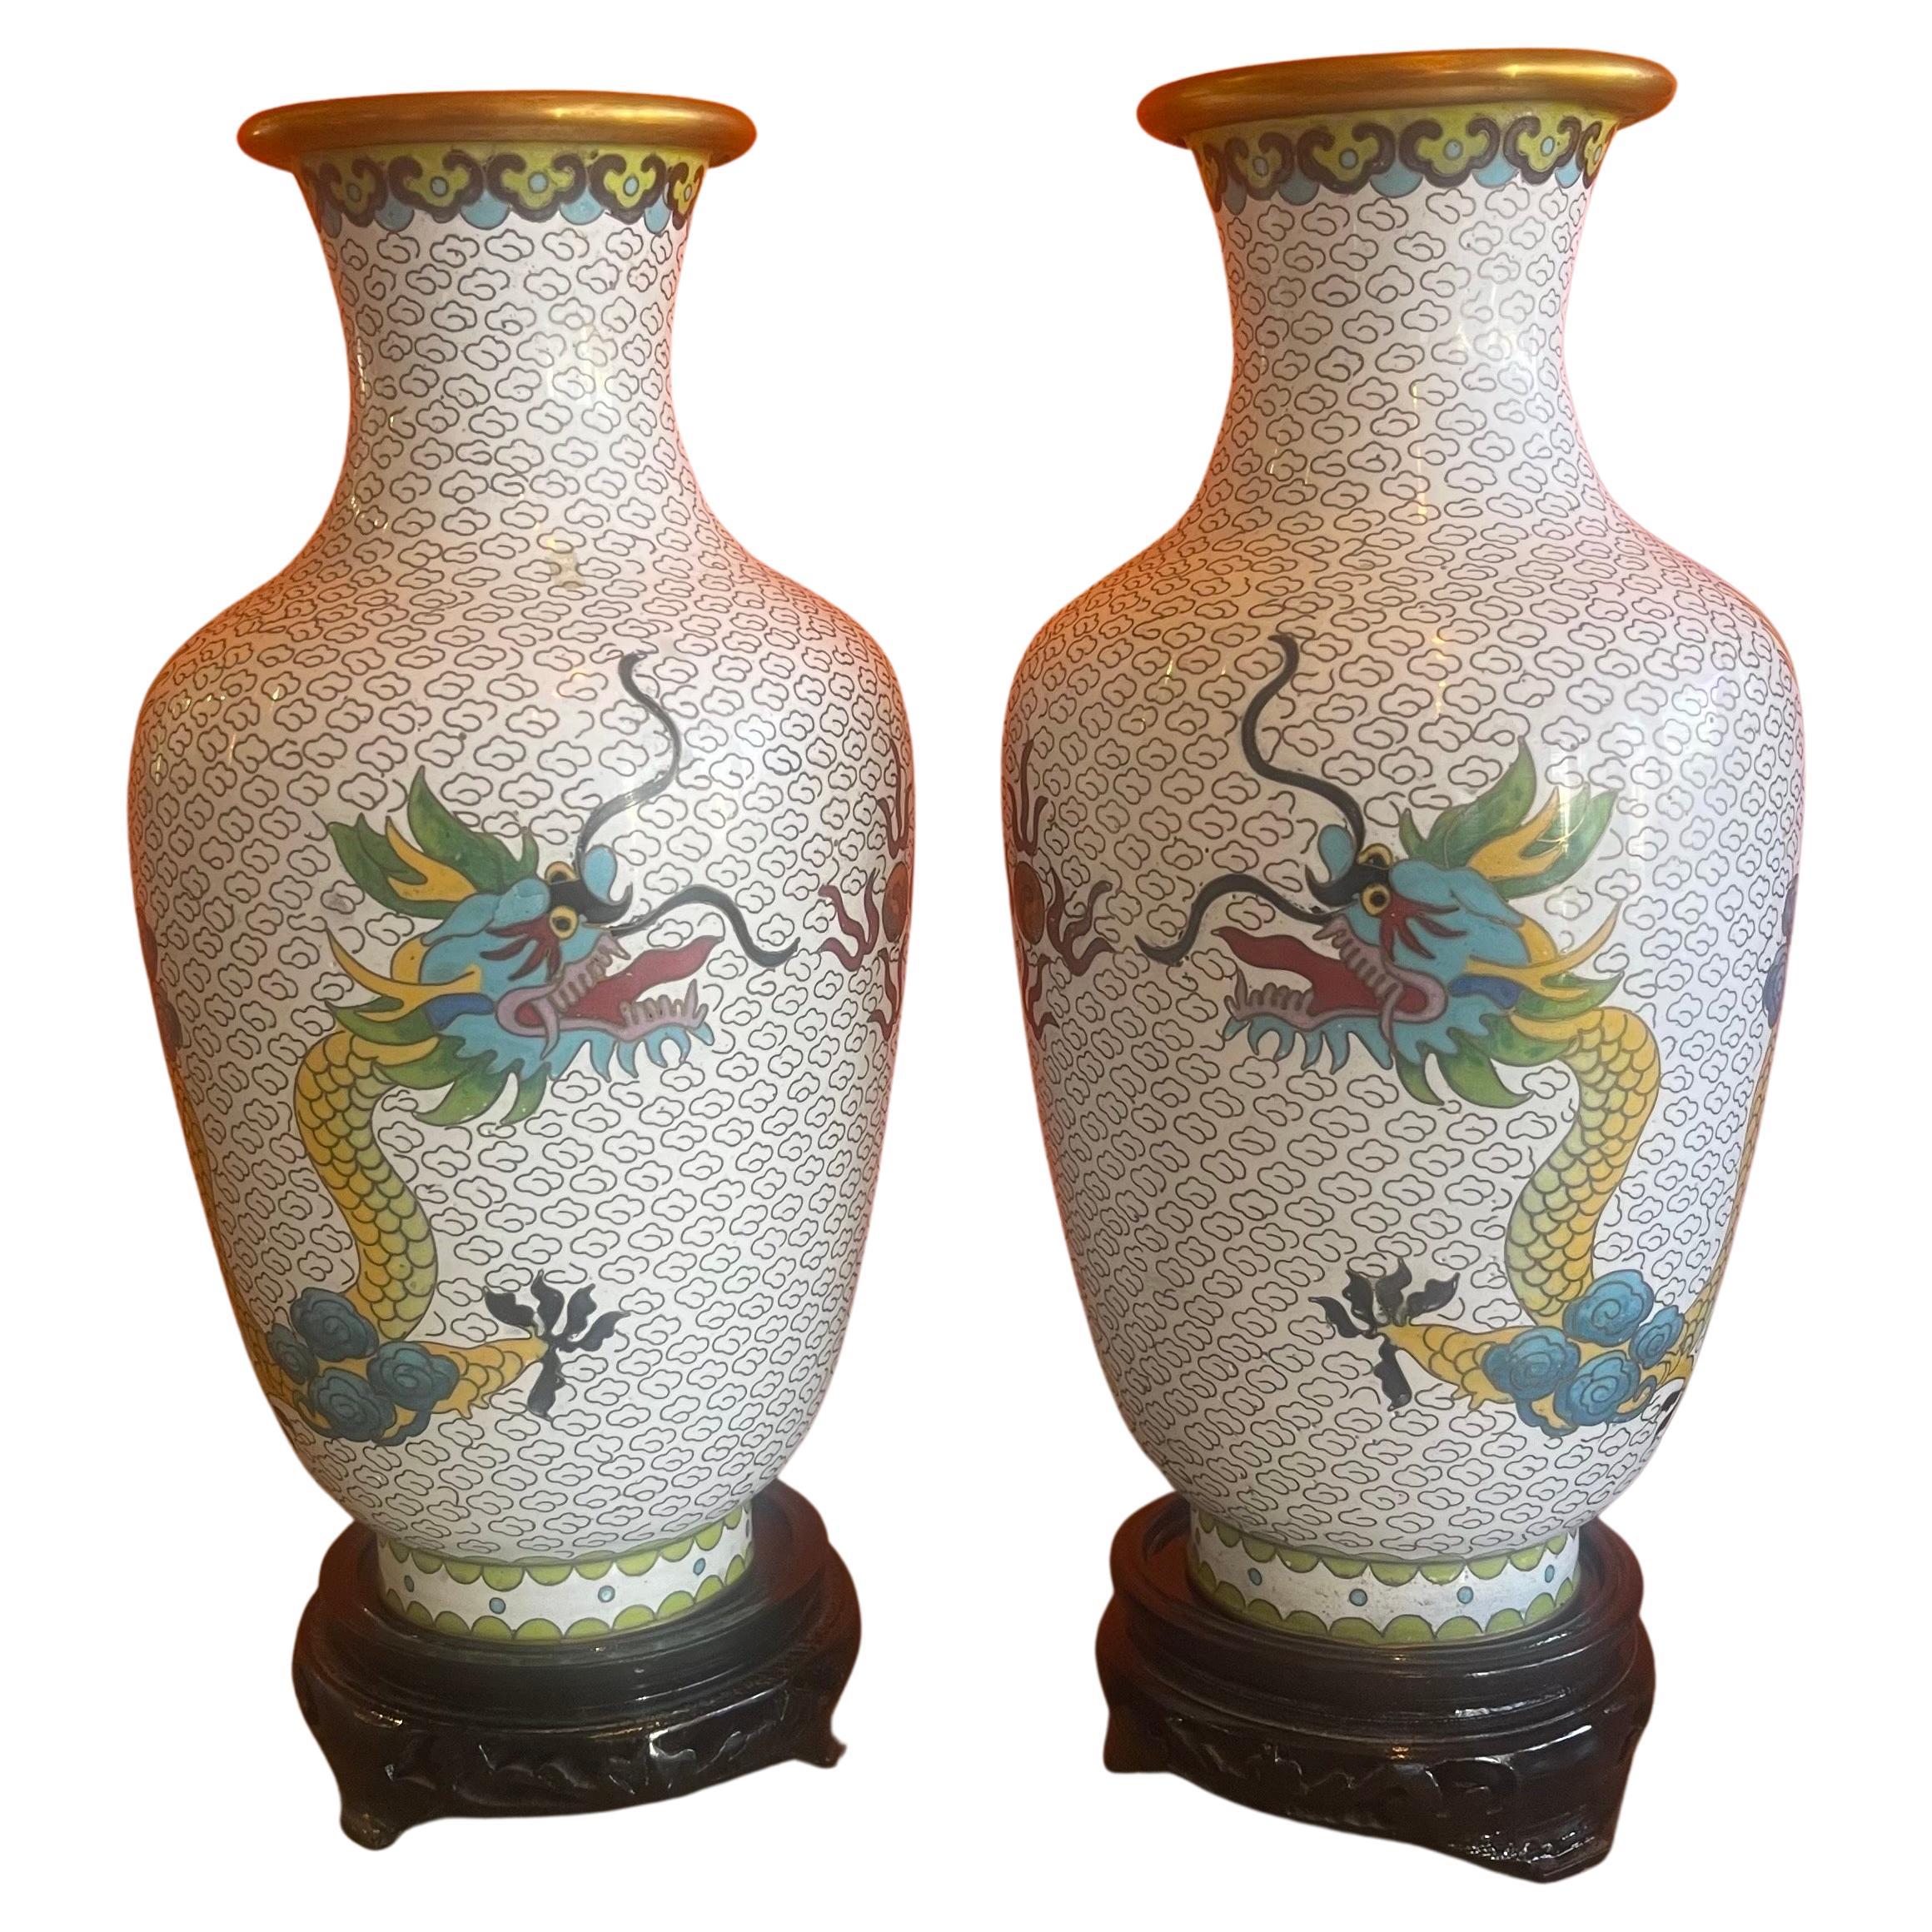 Mirrored Pair of Chinese Cloisonne Vases with Dragon Motif For Sale